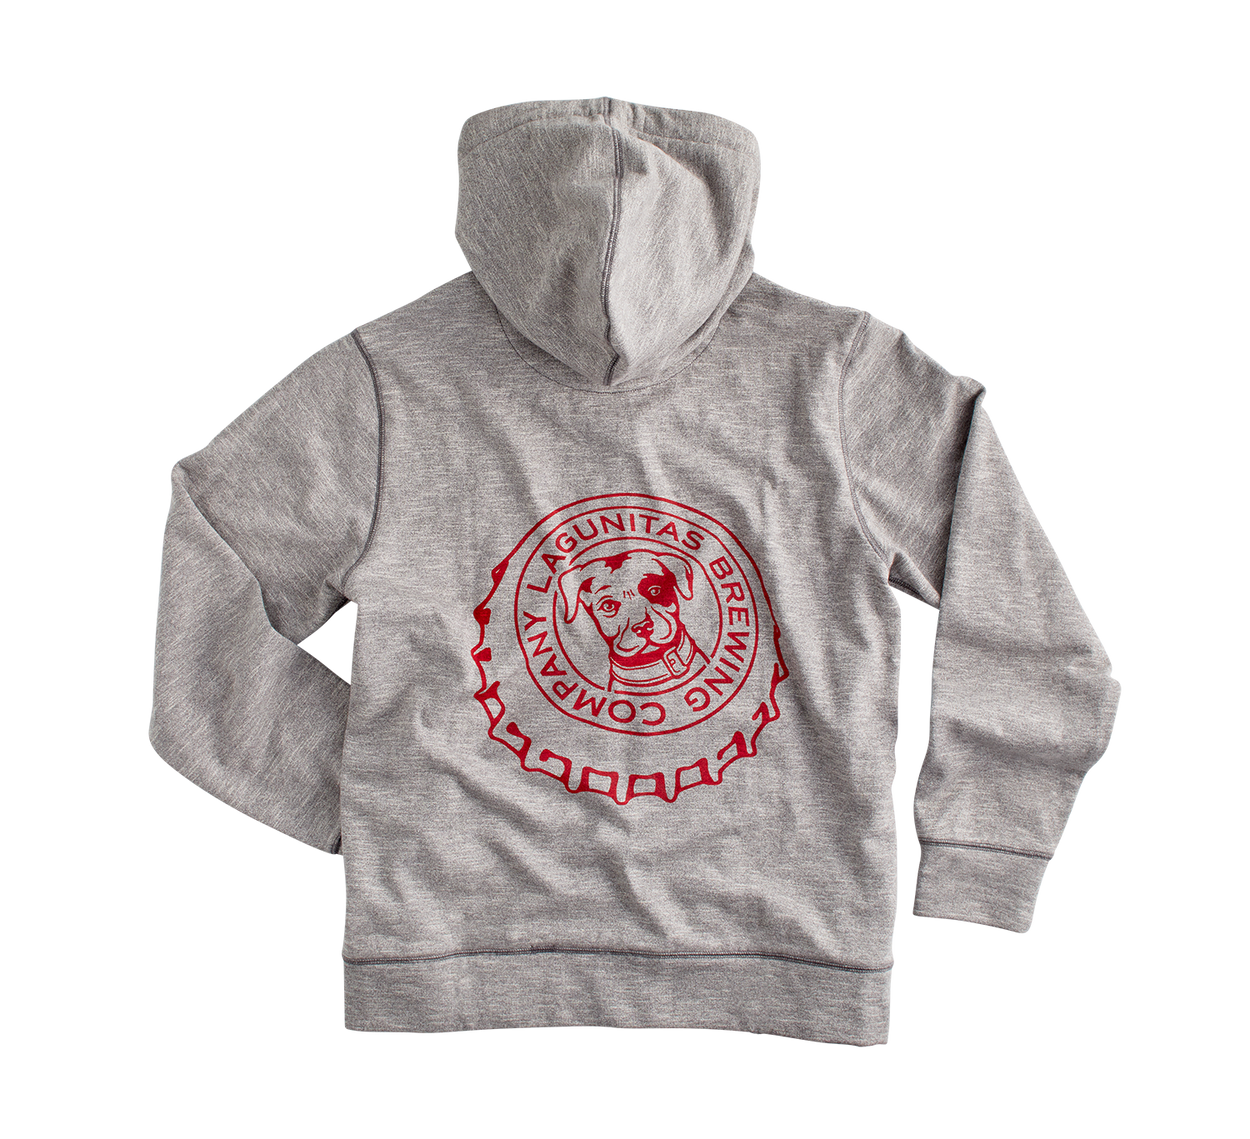  "Lagunitas Bottle Cap Hoodie - A cozy and stylish zip-up hoodie, perfect for Lagunitas lovers. Made with soft, high-quality materials for ultimate comfort during outdoor adventures with your furry sidekick. Join the Lagunitas adventure in style and show your love for the brand. 'Pawesome' moments await! Get yours now."